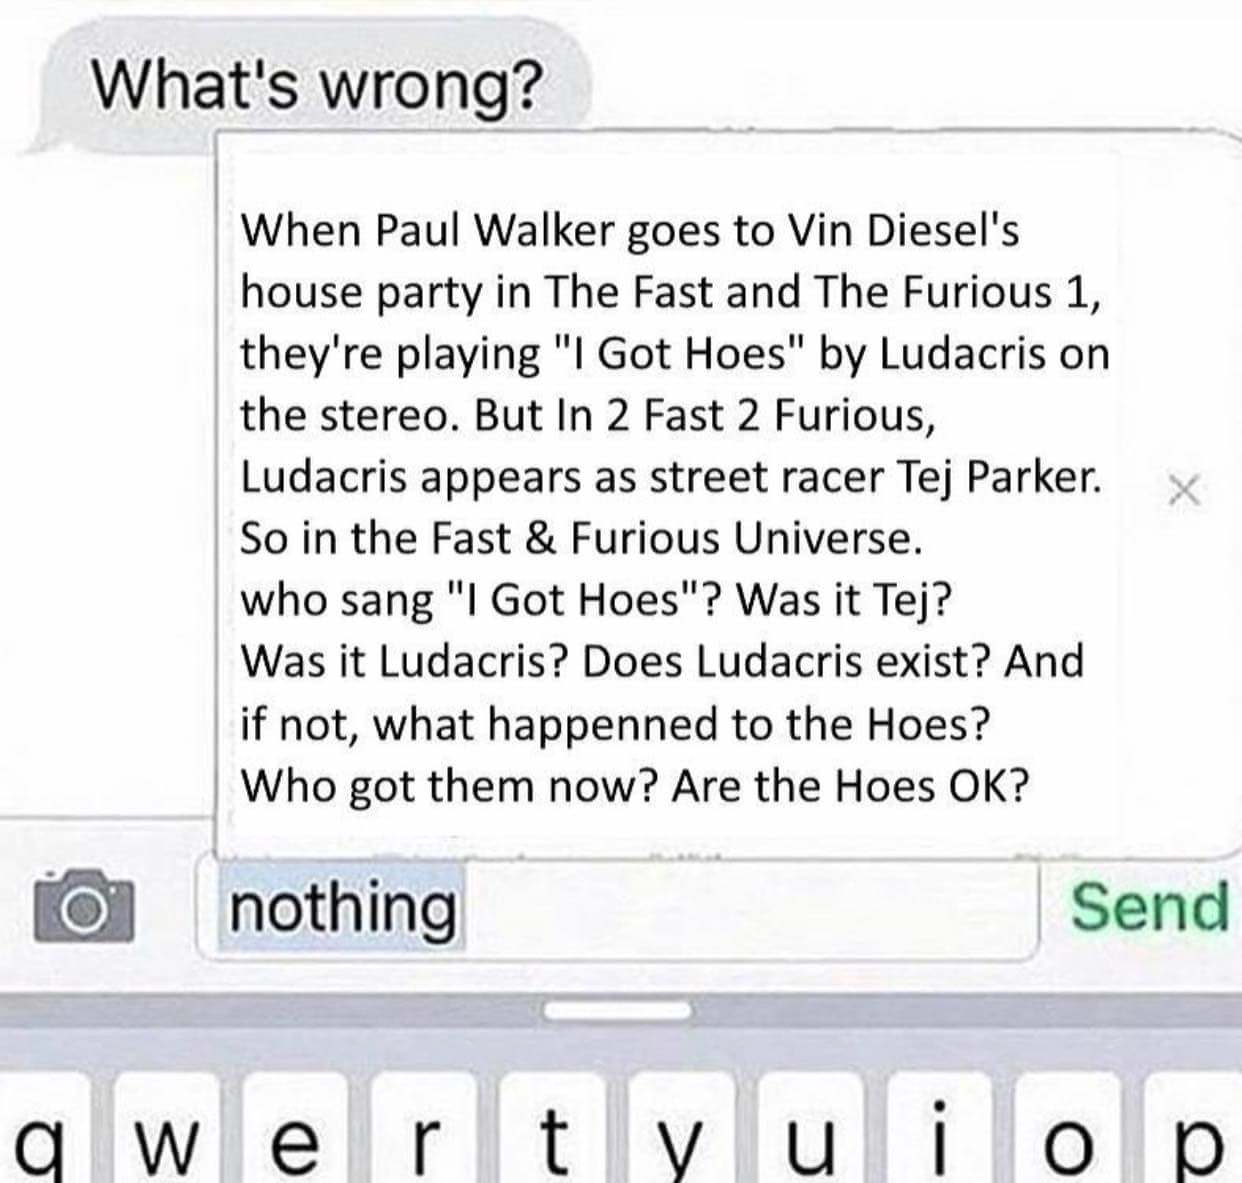 document - What's wrong? When Paul Walker goes to Vin Diesel's house party in The Fast and The Furious 1, they're playing "I Got Hoes" by Ludacris on the stereo. But In 2 Fast 2 Furious, Ludacris appears as street racer Tej Parker. So in the Fast & Furiou